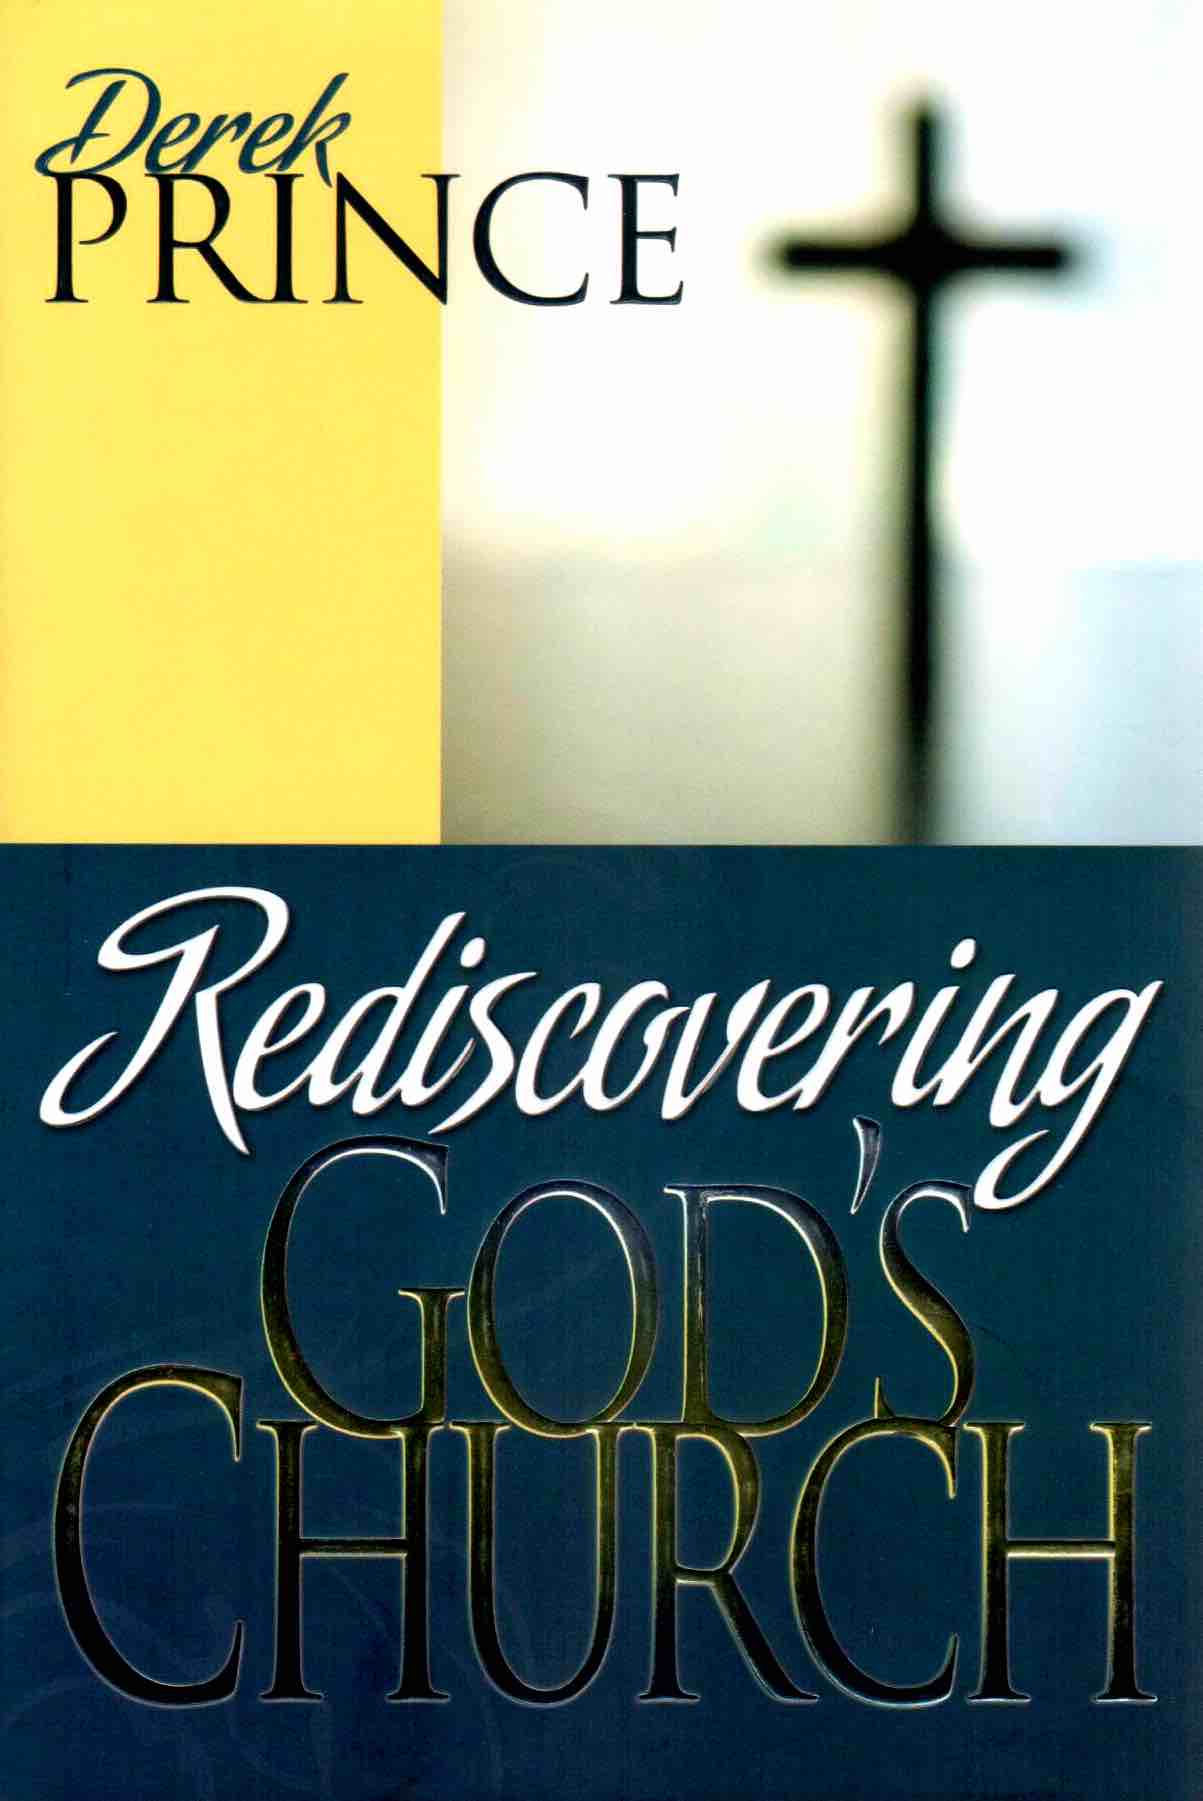 Cover of Rediscovering God's Church